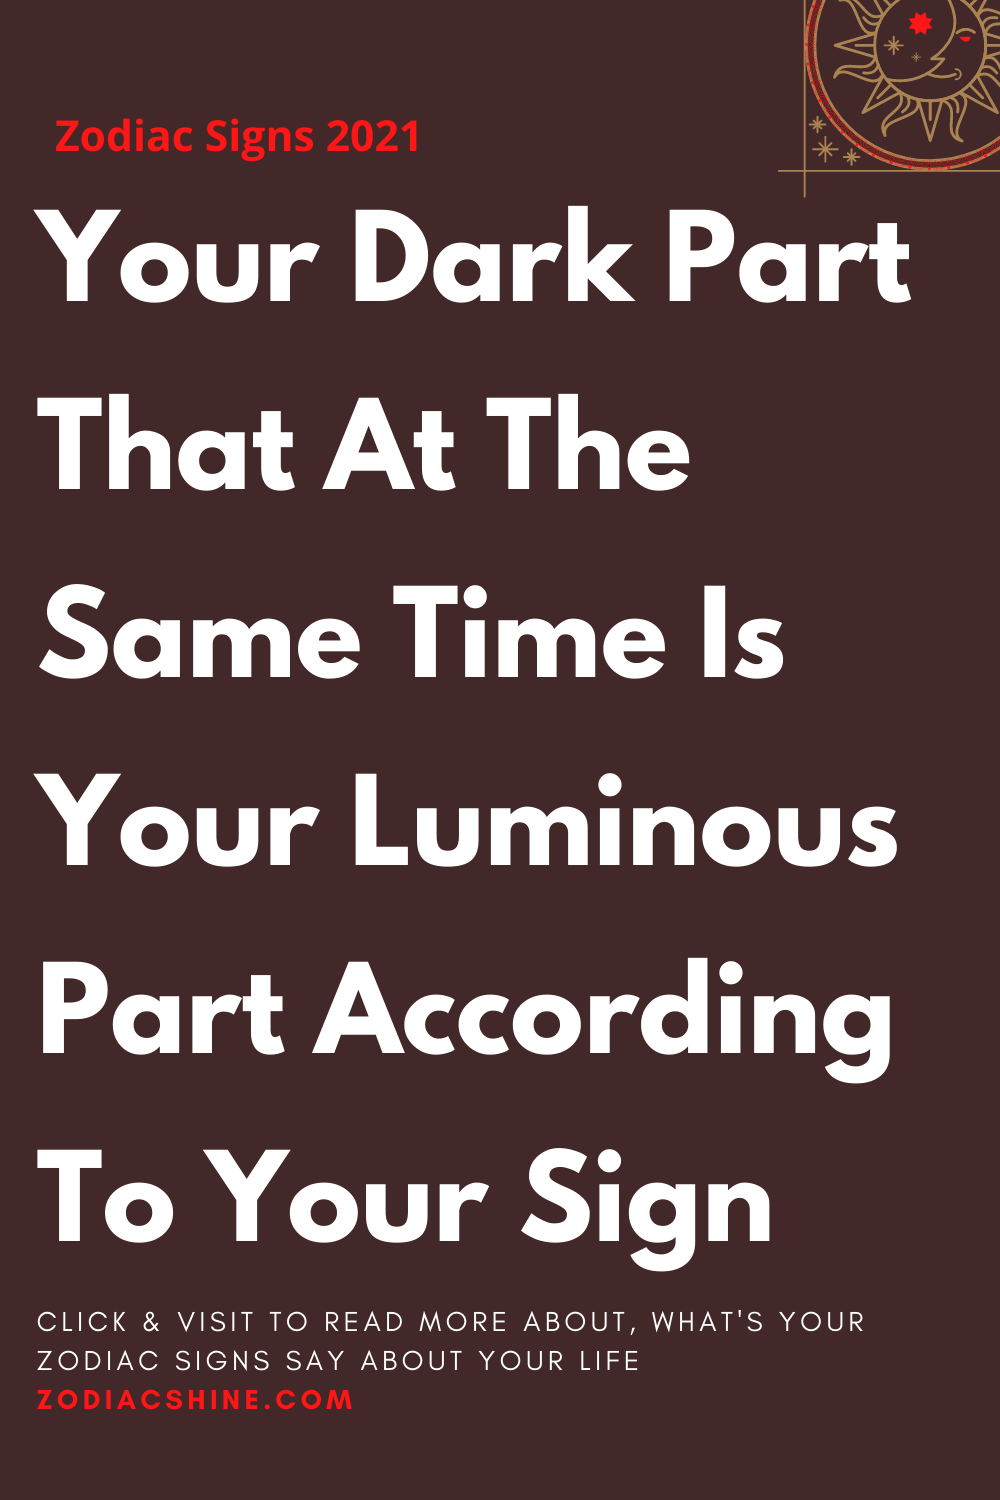 Your Dark Part That At The Same Time Is Your Luminous Part According To Your Sign